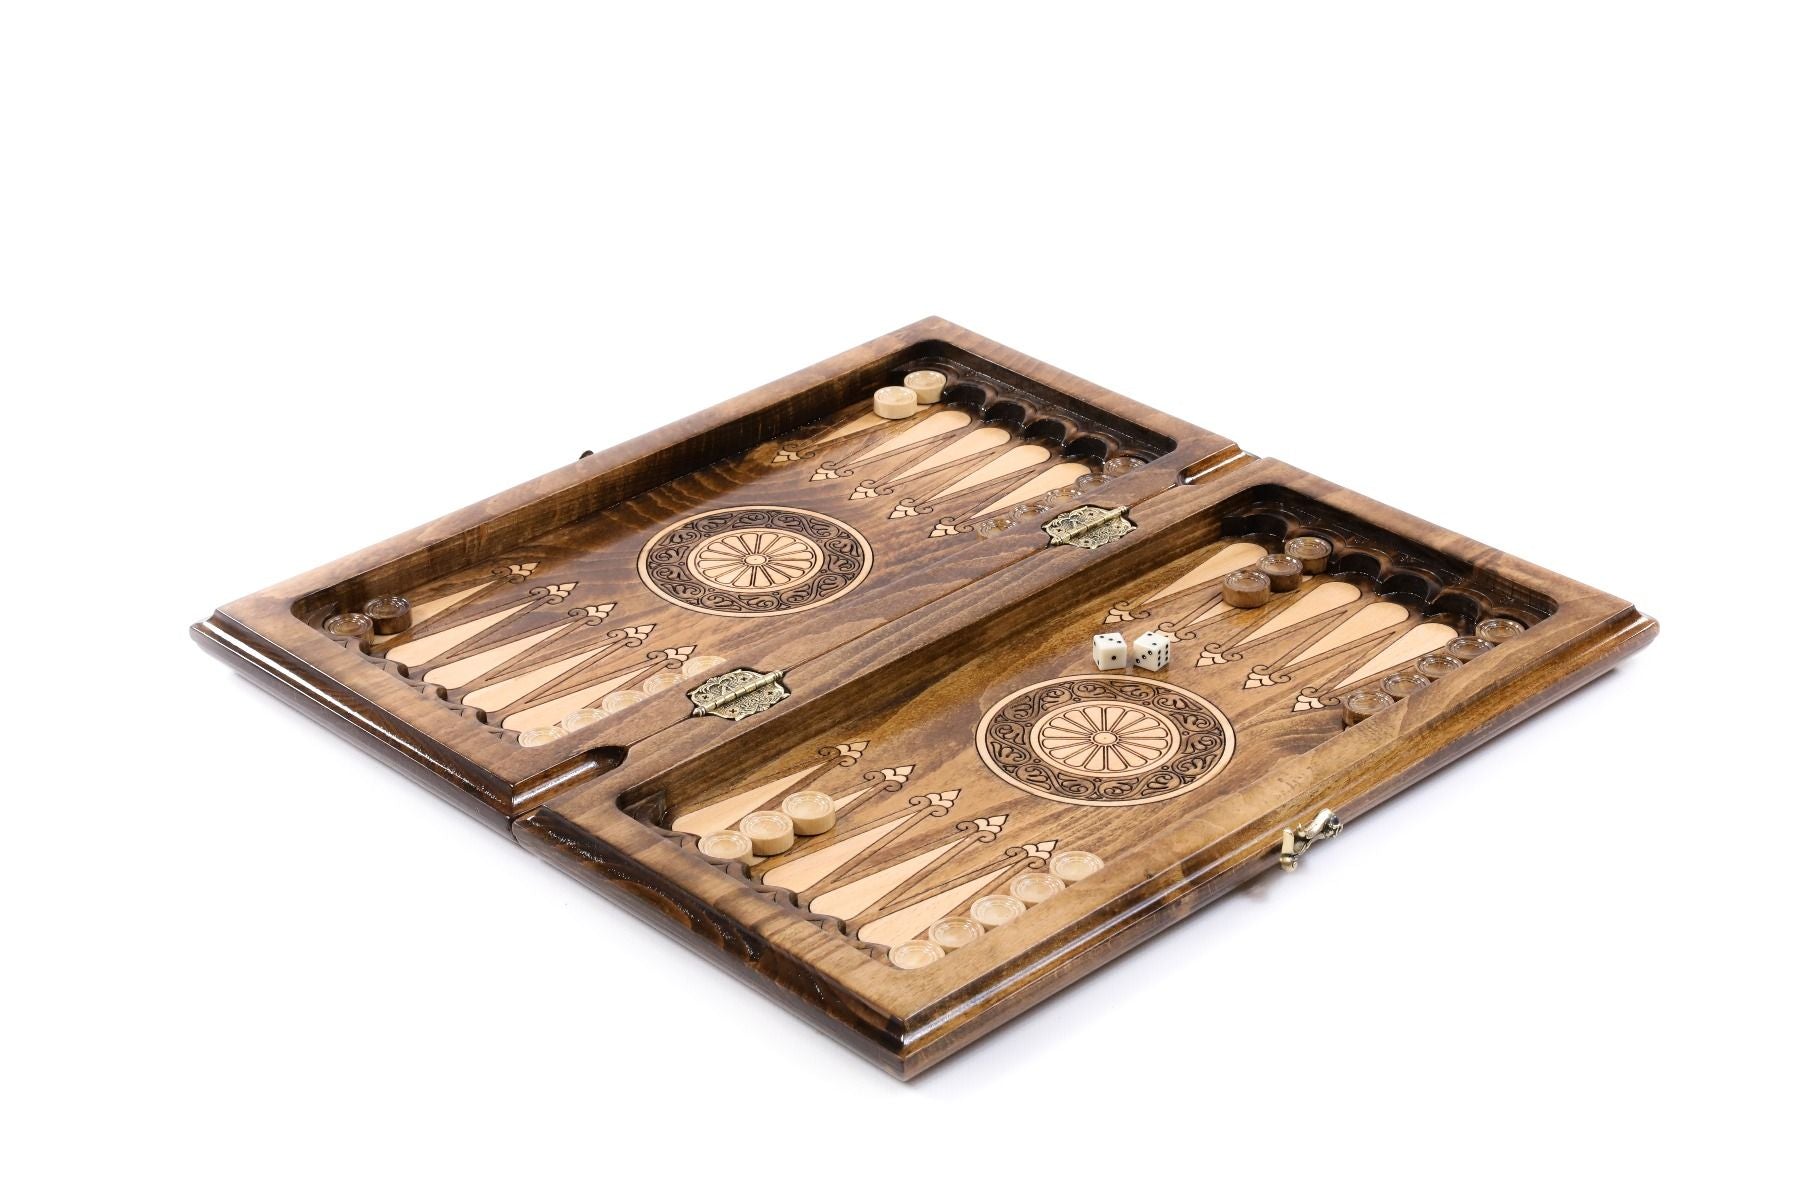 Discover the pinnacle of gaming elegance with a chess and backgammon set that exemplifies the beauty of artisan carving.